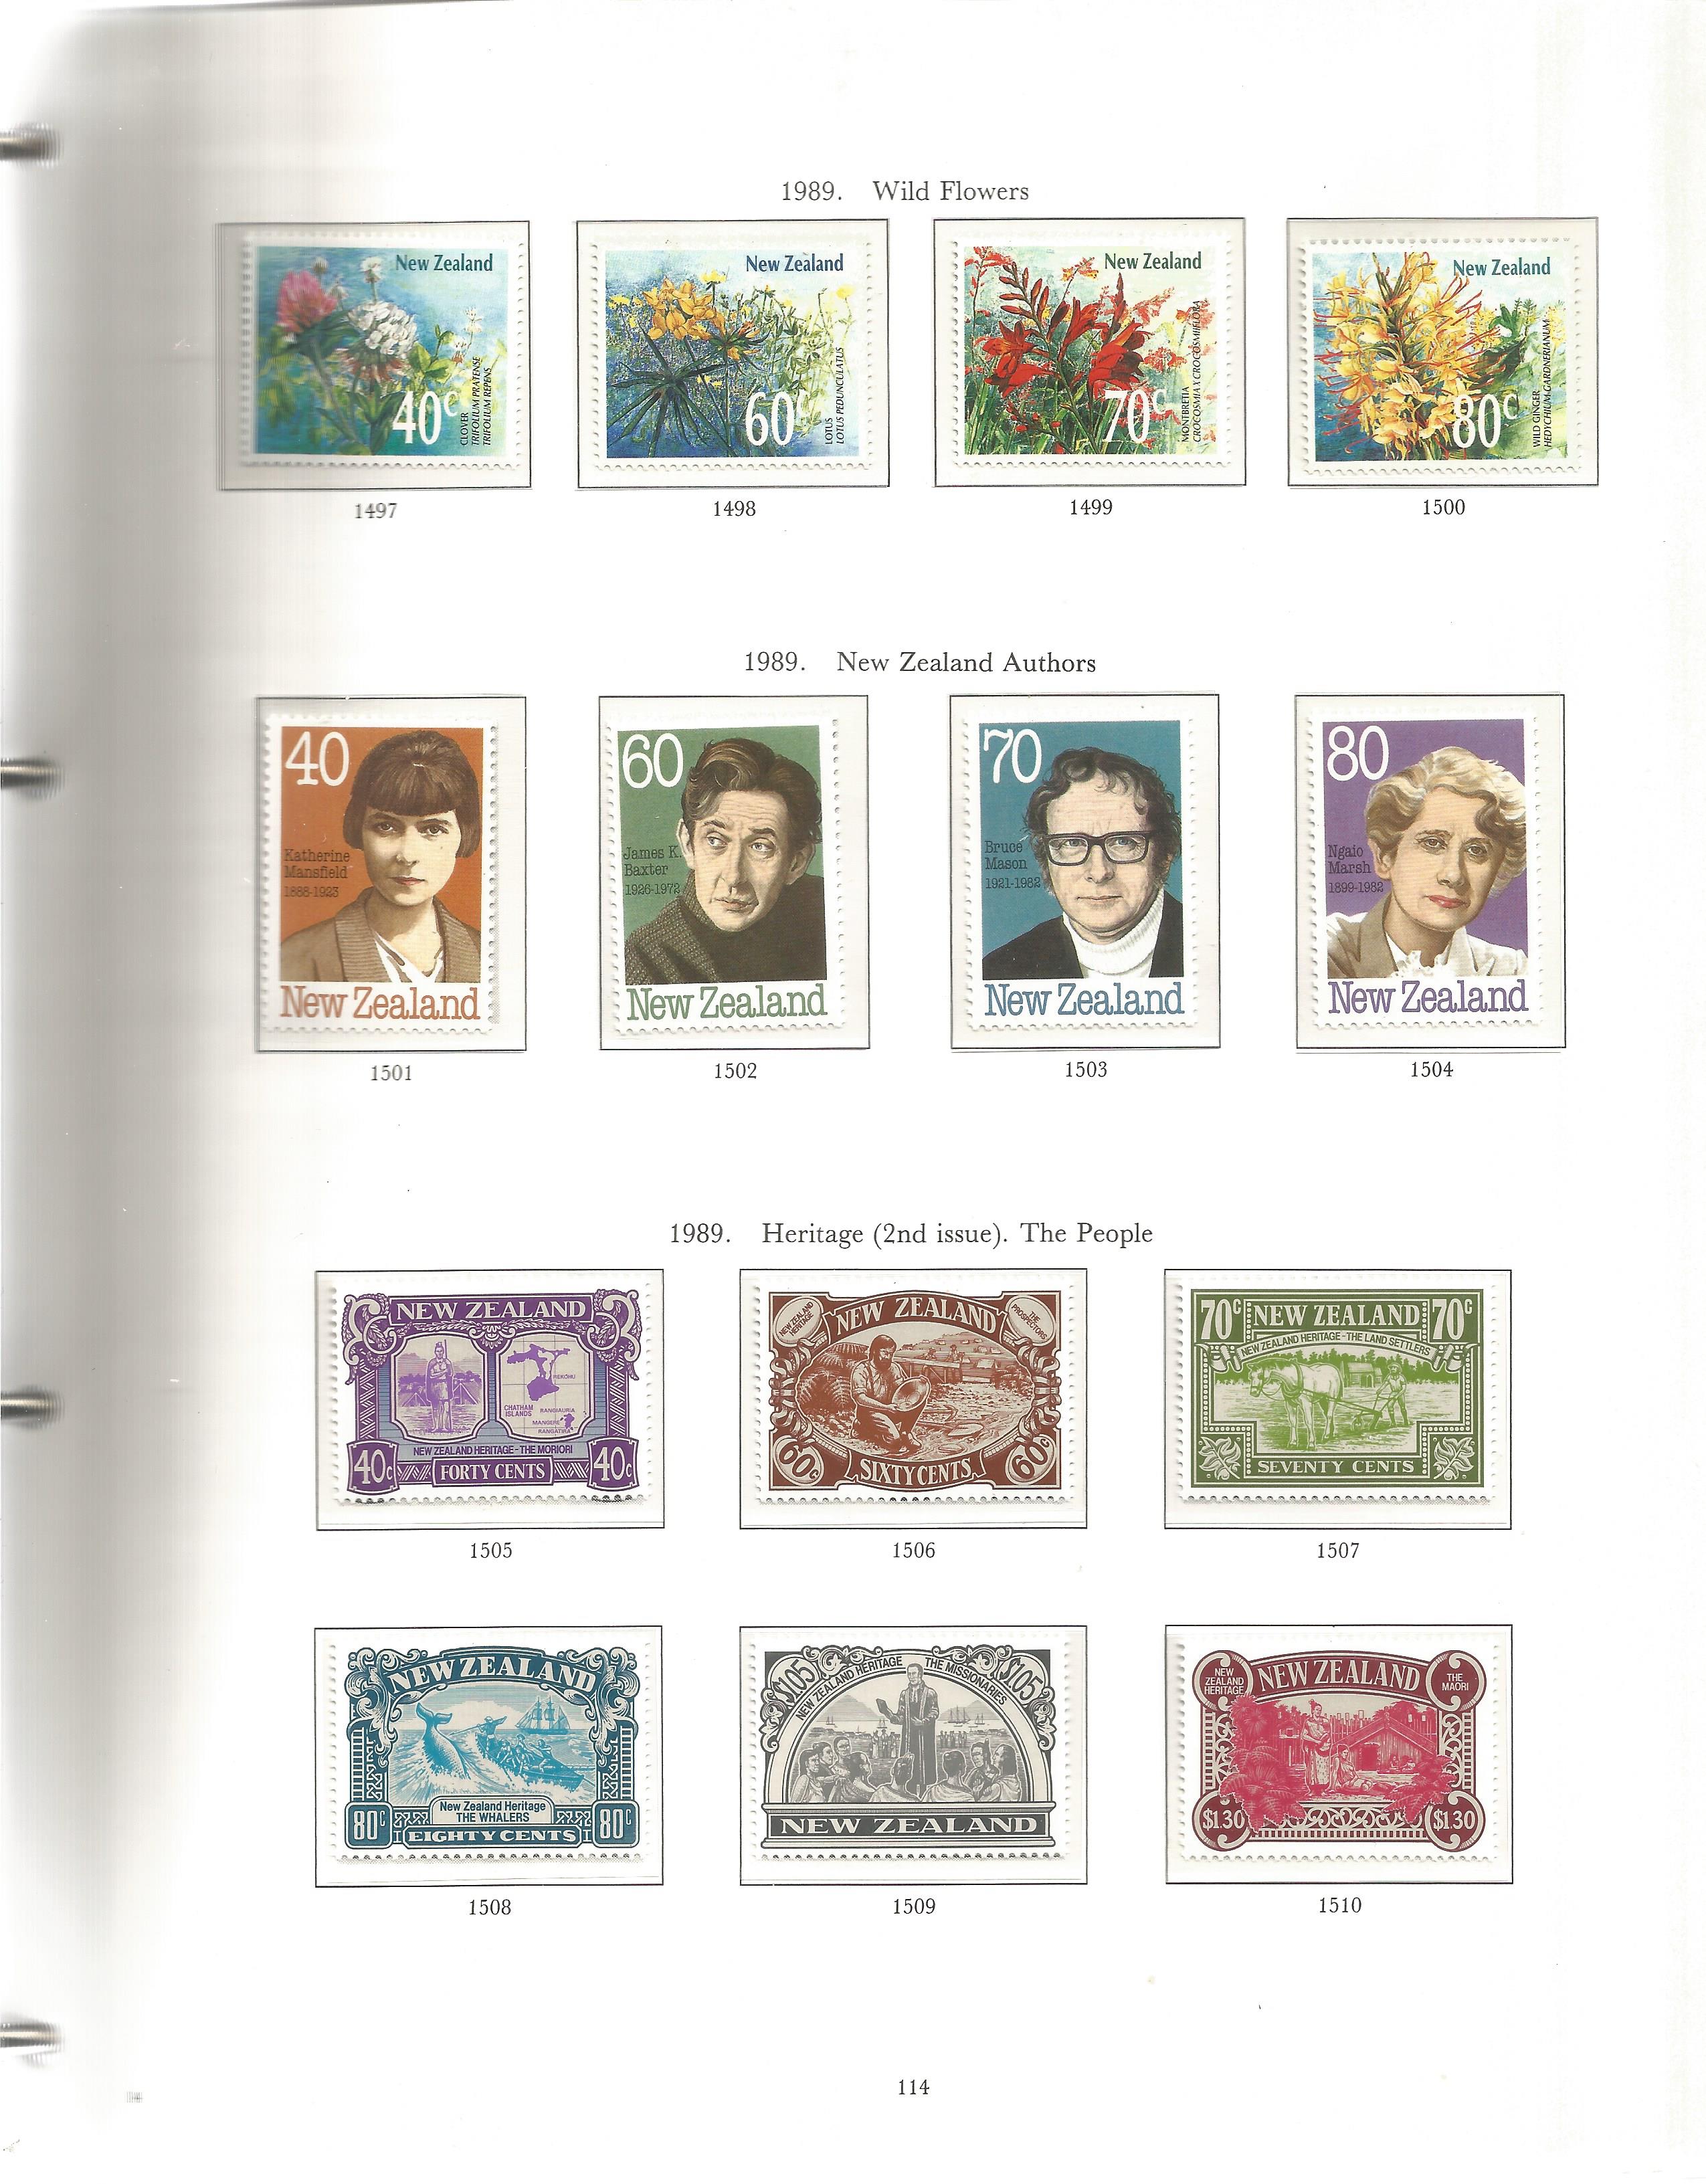 Stanley Gibbons New Zealand Stamp Album with 300 - 400 used Stamps from 1907 - 1990. We combine